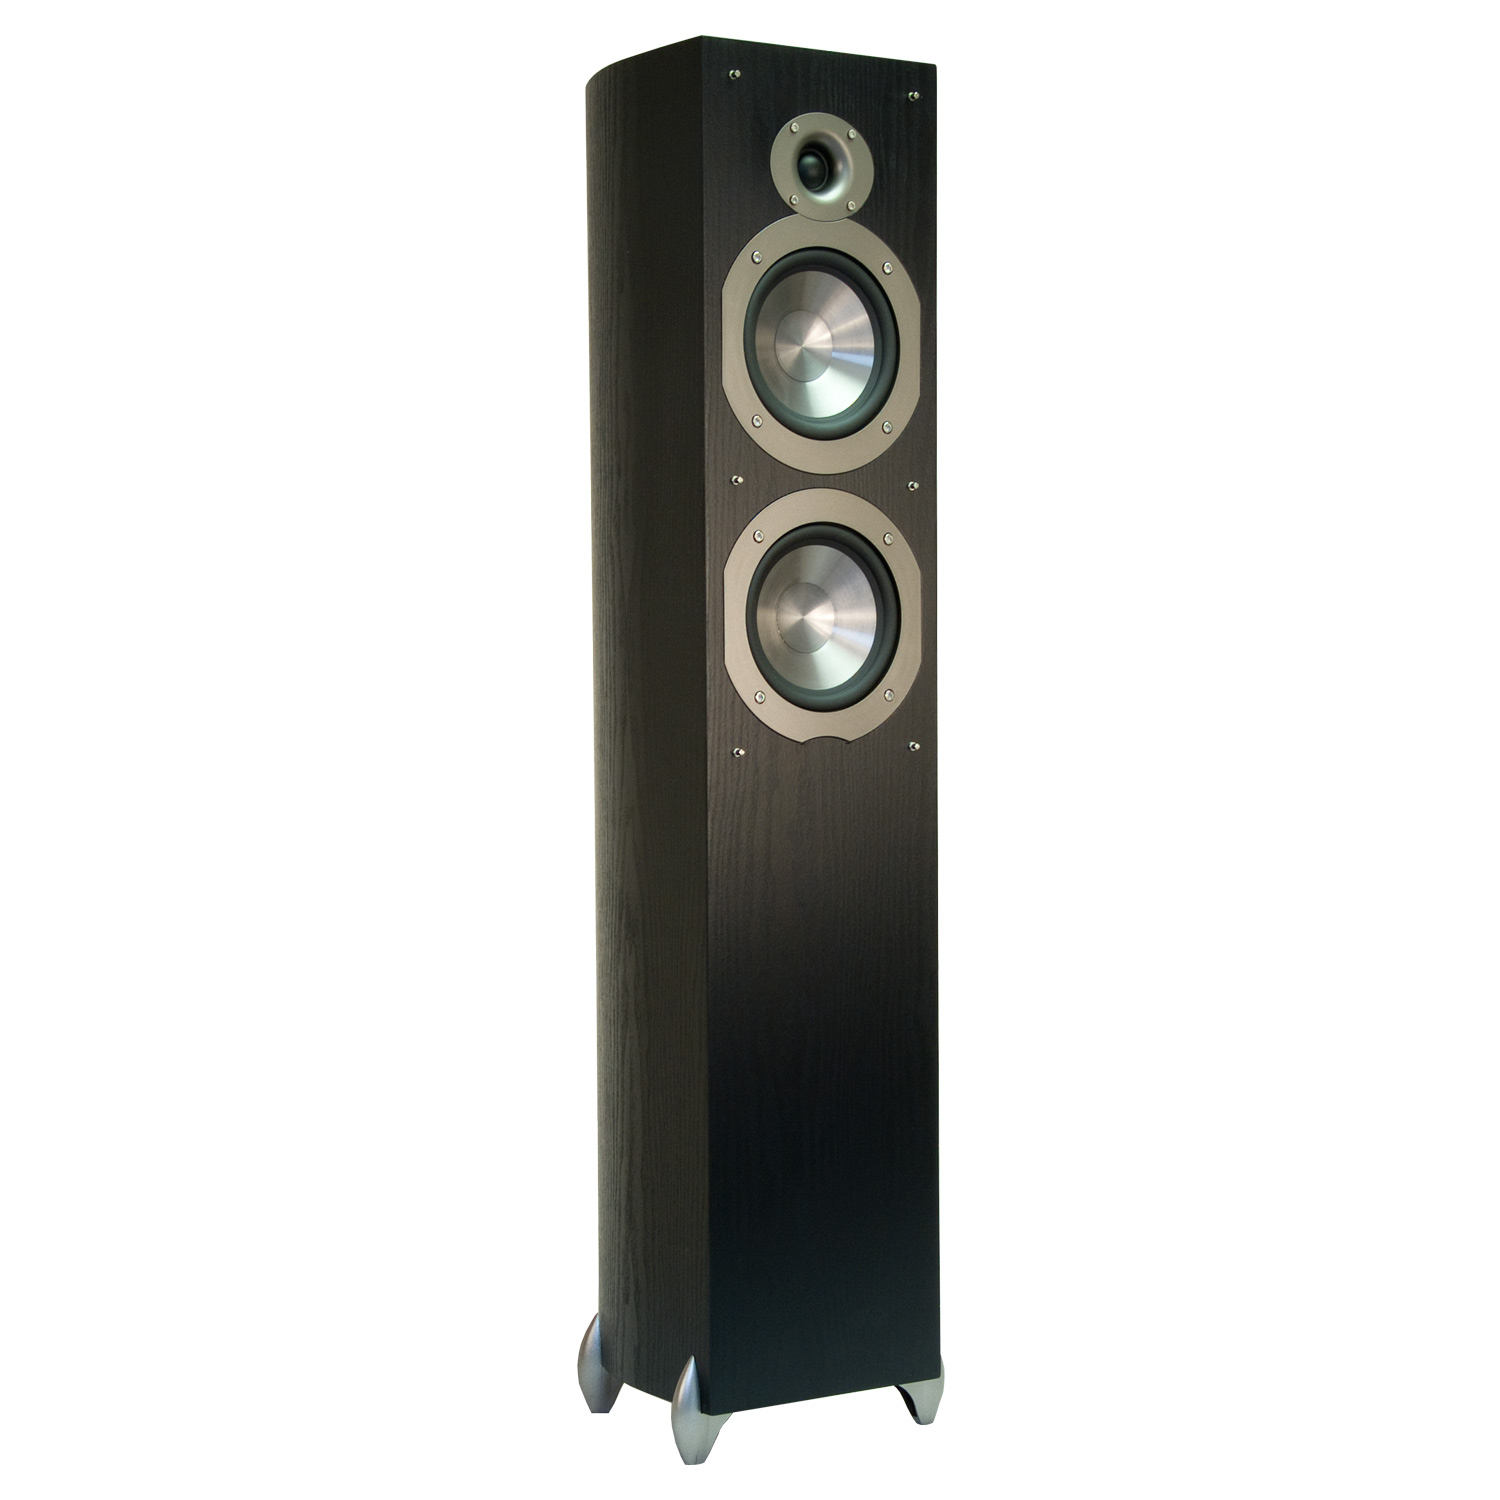 Phase V626 3-way tower speaker (black)(each) - Click Image to Close